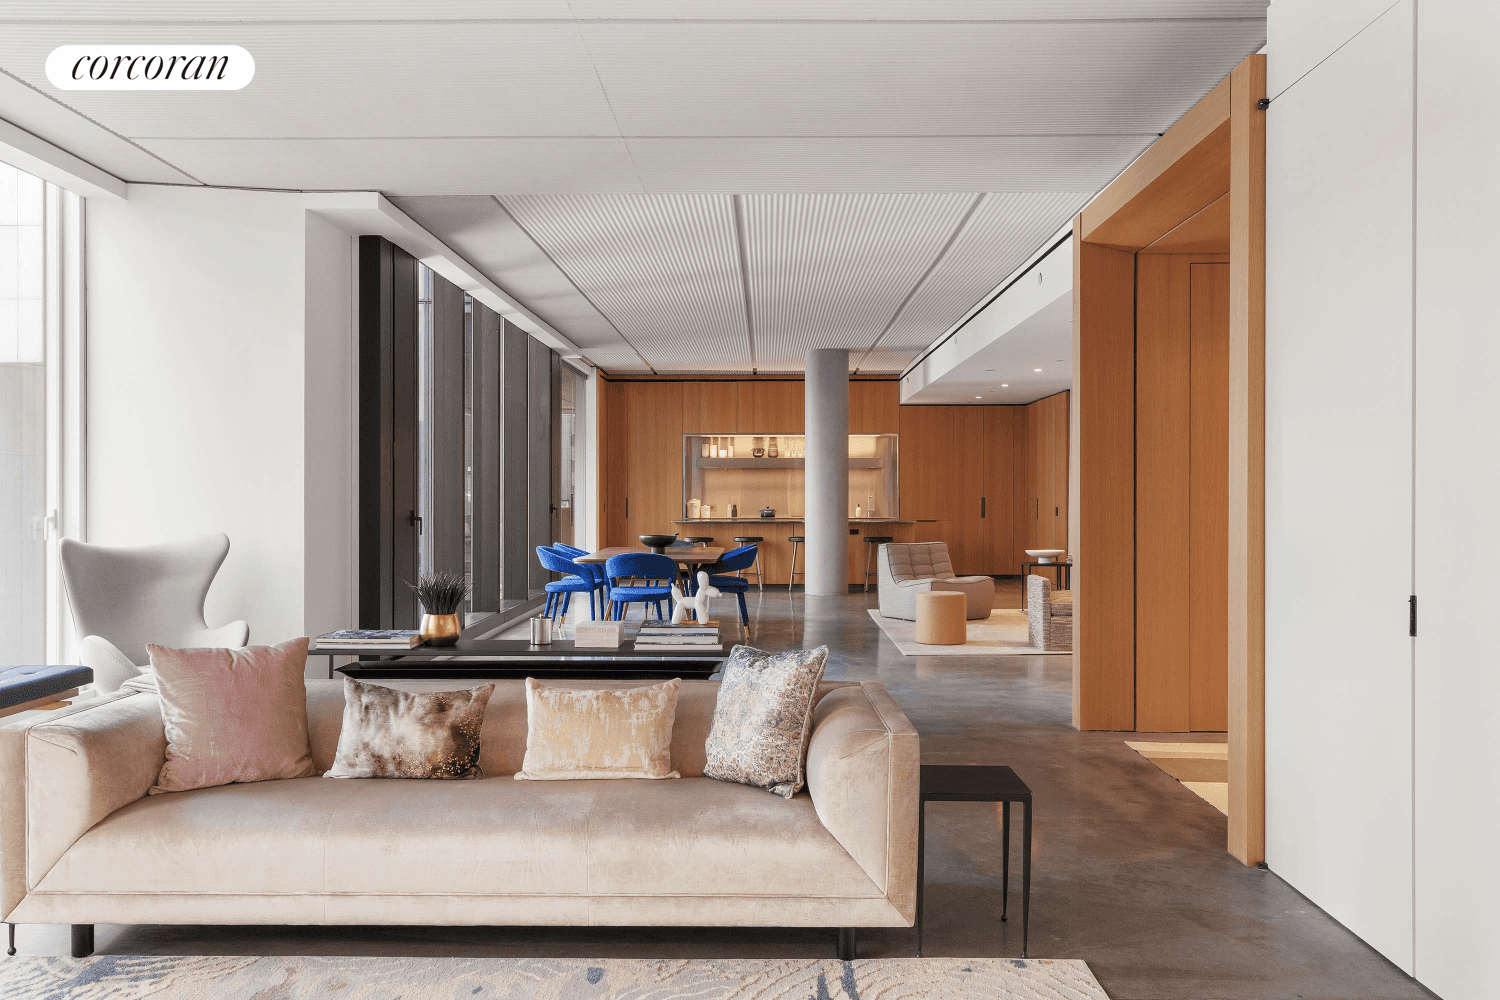 UNIQUE OPPORTUNITY ! Selene, located at 100 East 53rd Street, offers graciously scaled residences and sophisticated design by renowned architects, Foster Partners with interiors in collaboration with AD100 recipient William ...